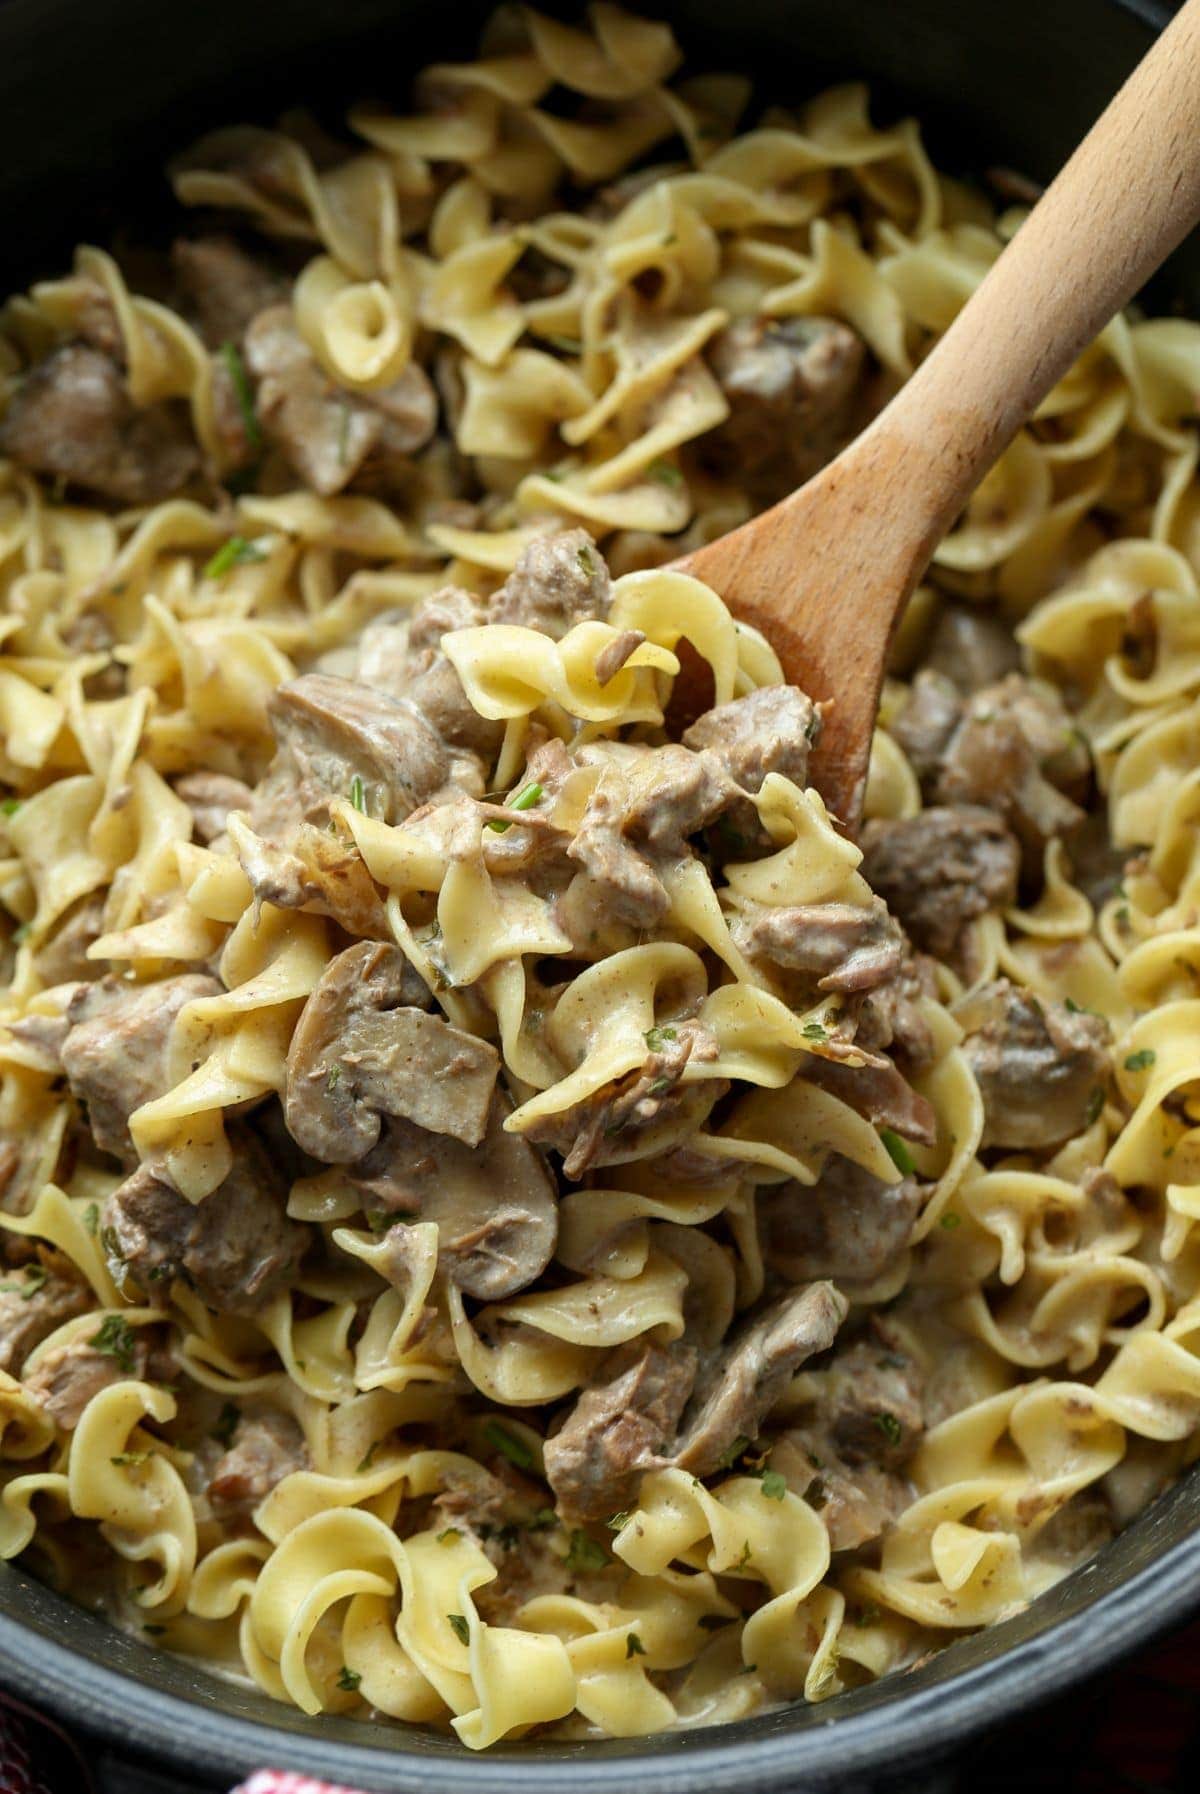 A portion of stroganoff with egg noodles being scooped out of a Crockpot with a wooden spoon.